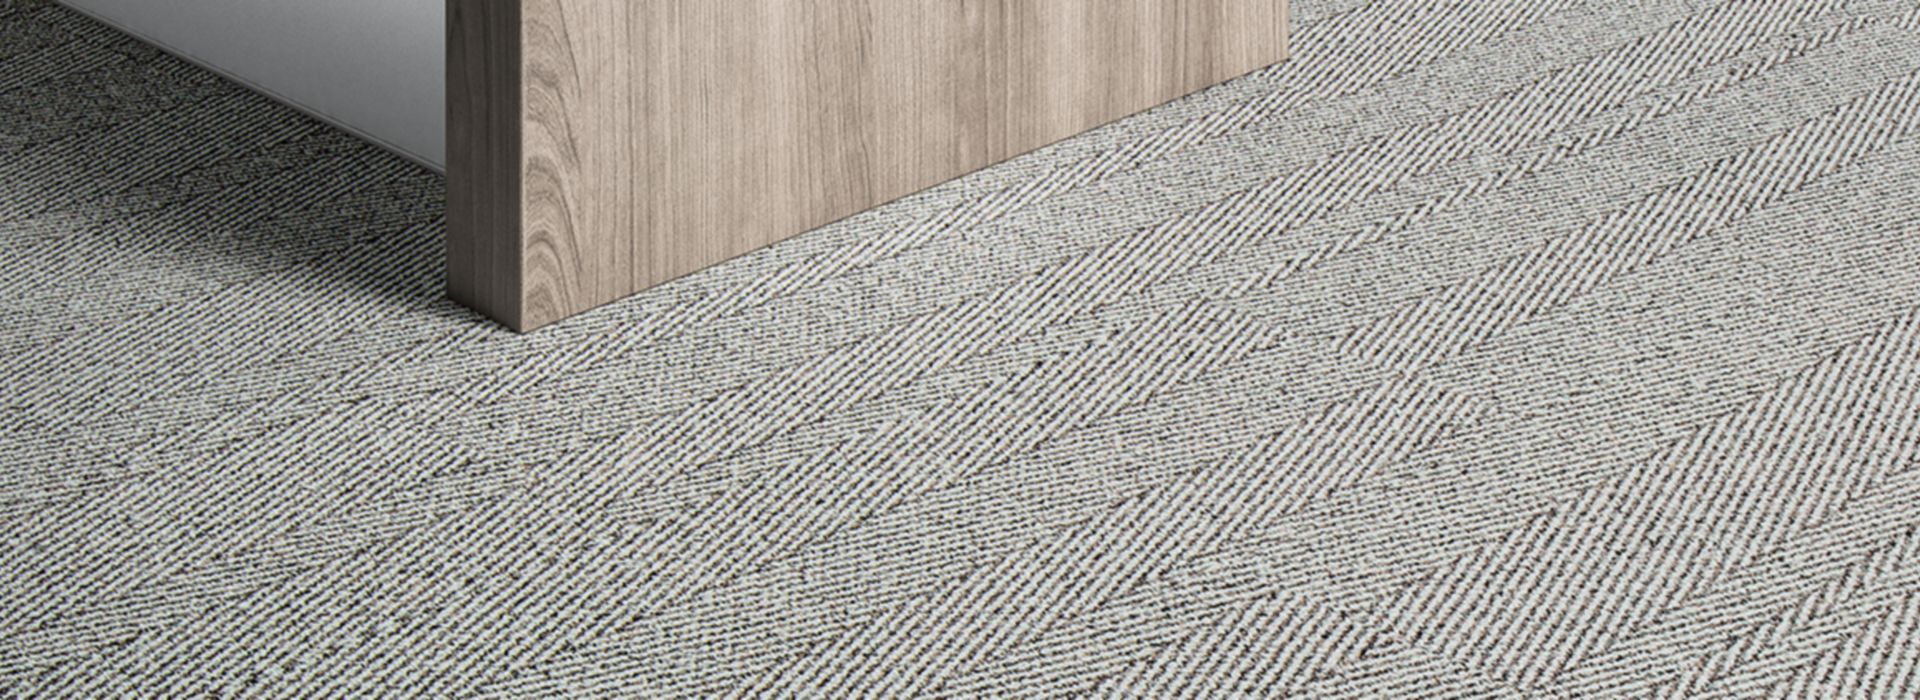 Interface Stitch in Timeplank carpet tile  in office with wood desk and chair numéro d’image 1